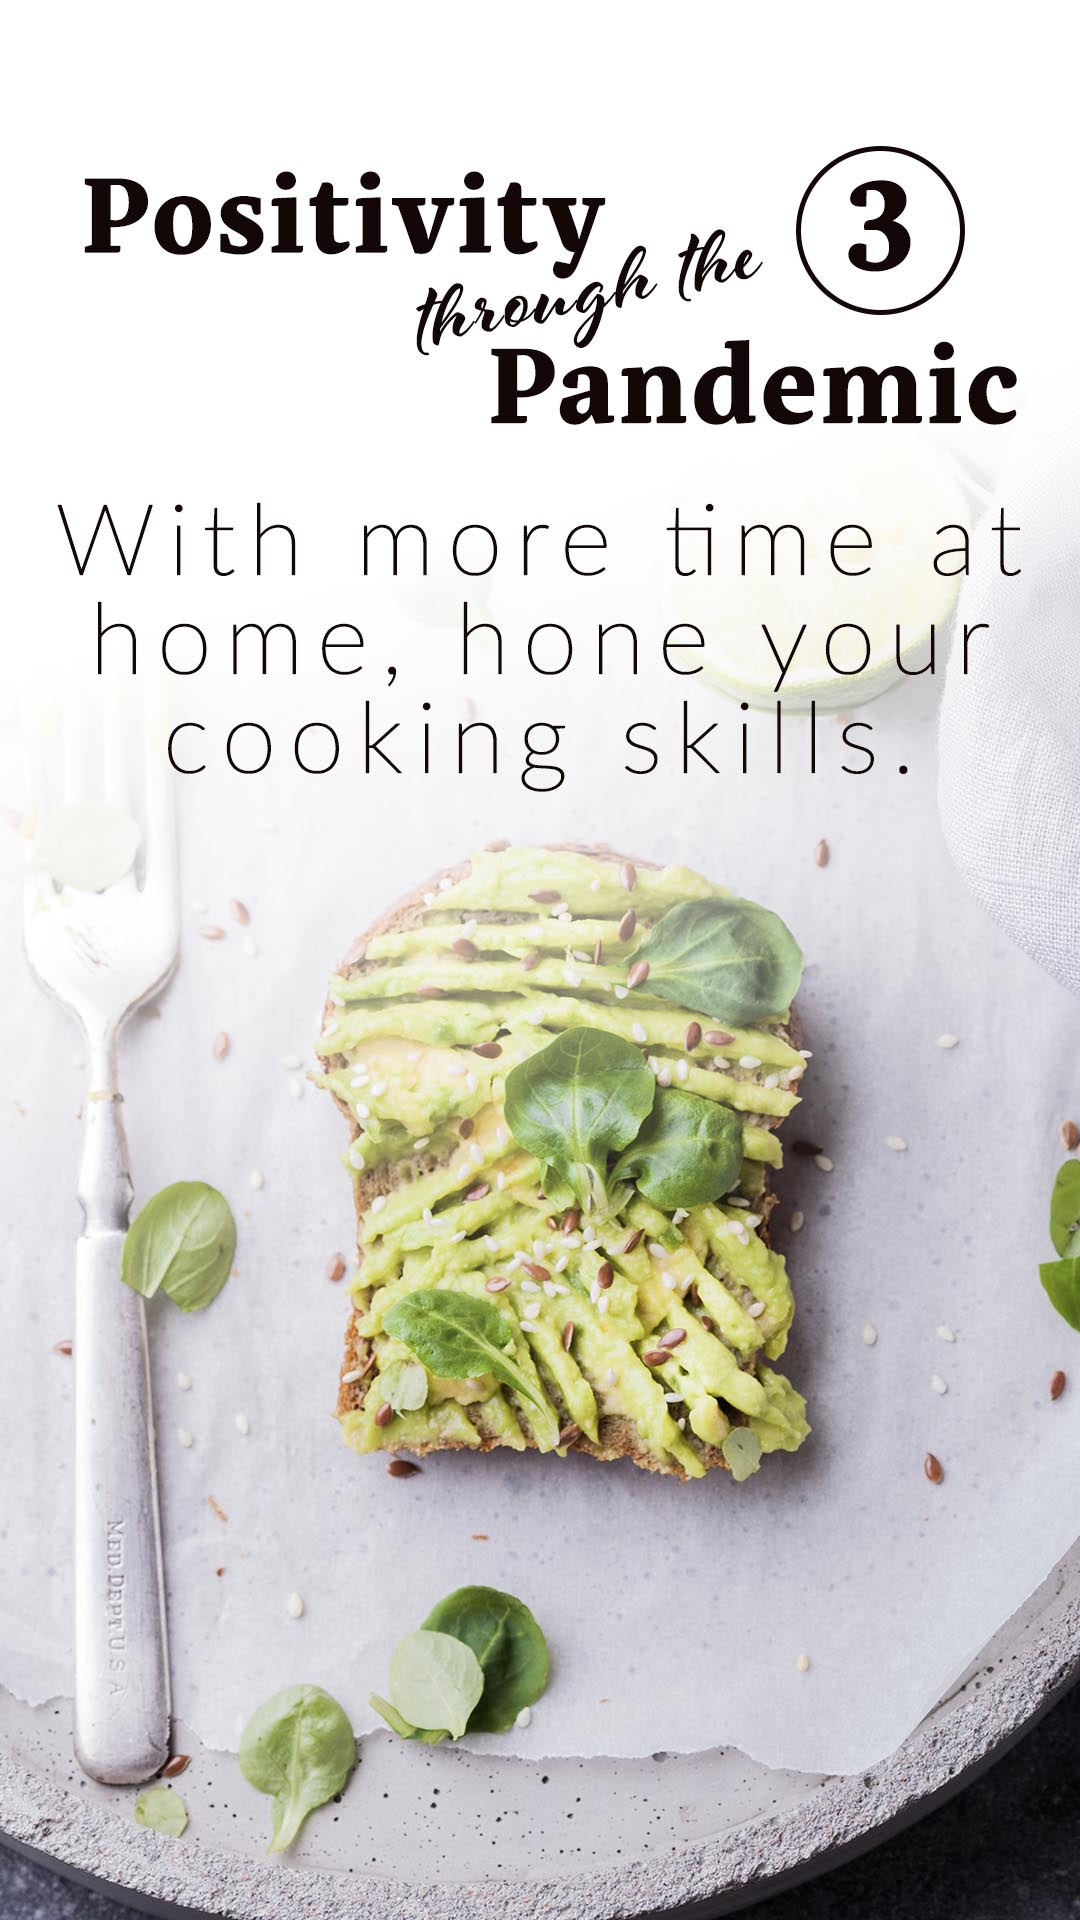 Positivity through the Pandemic #3: With more time at home, hone your cooking skills